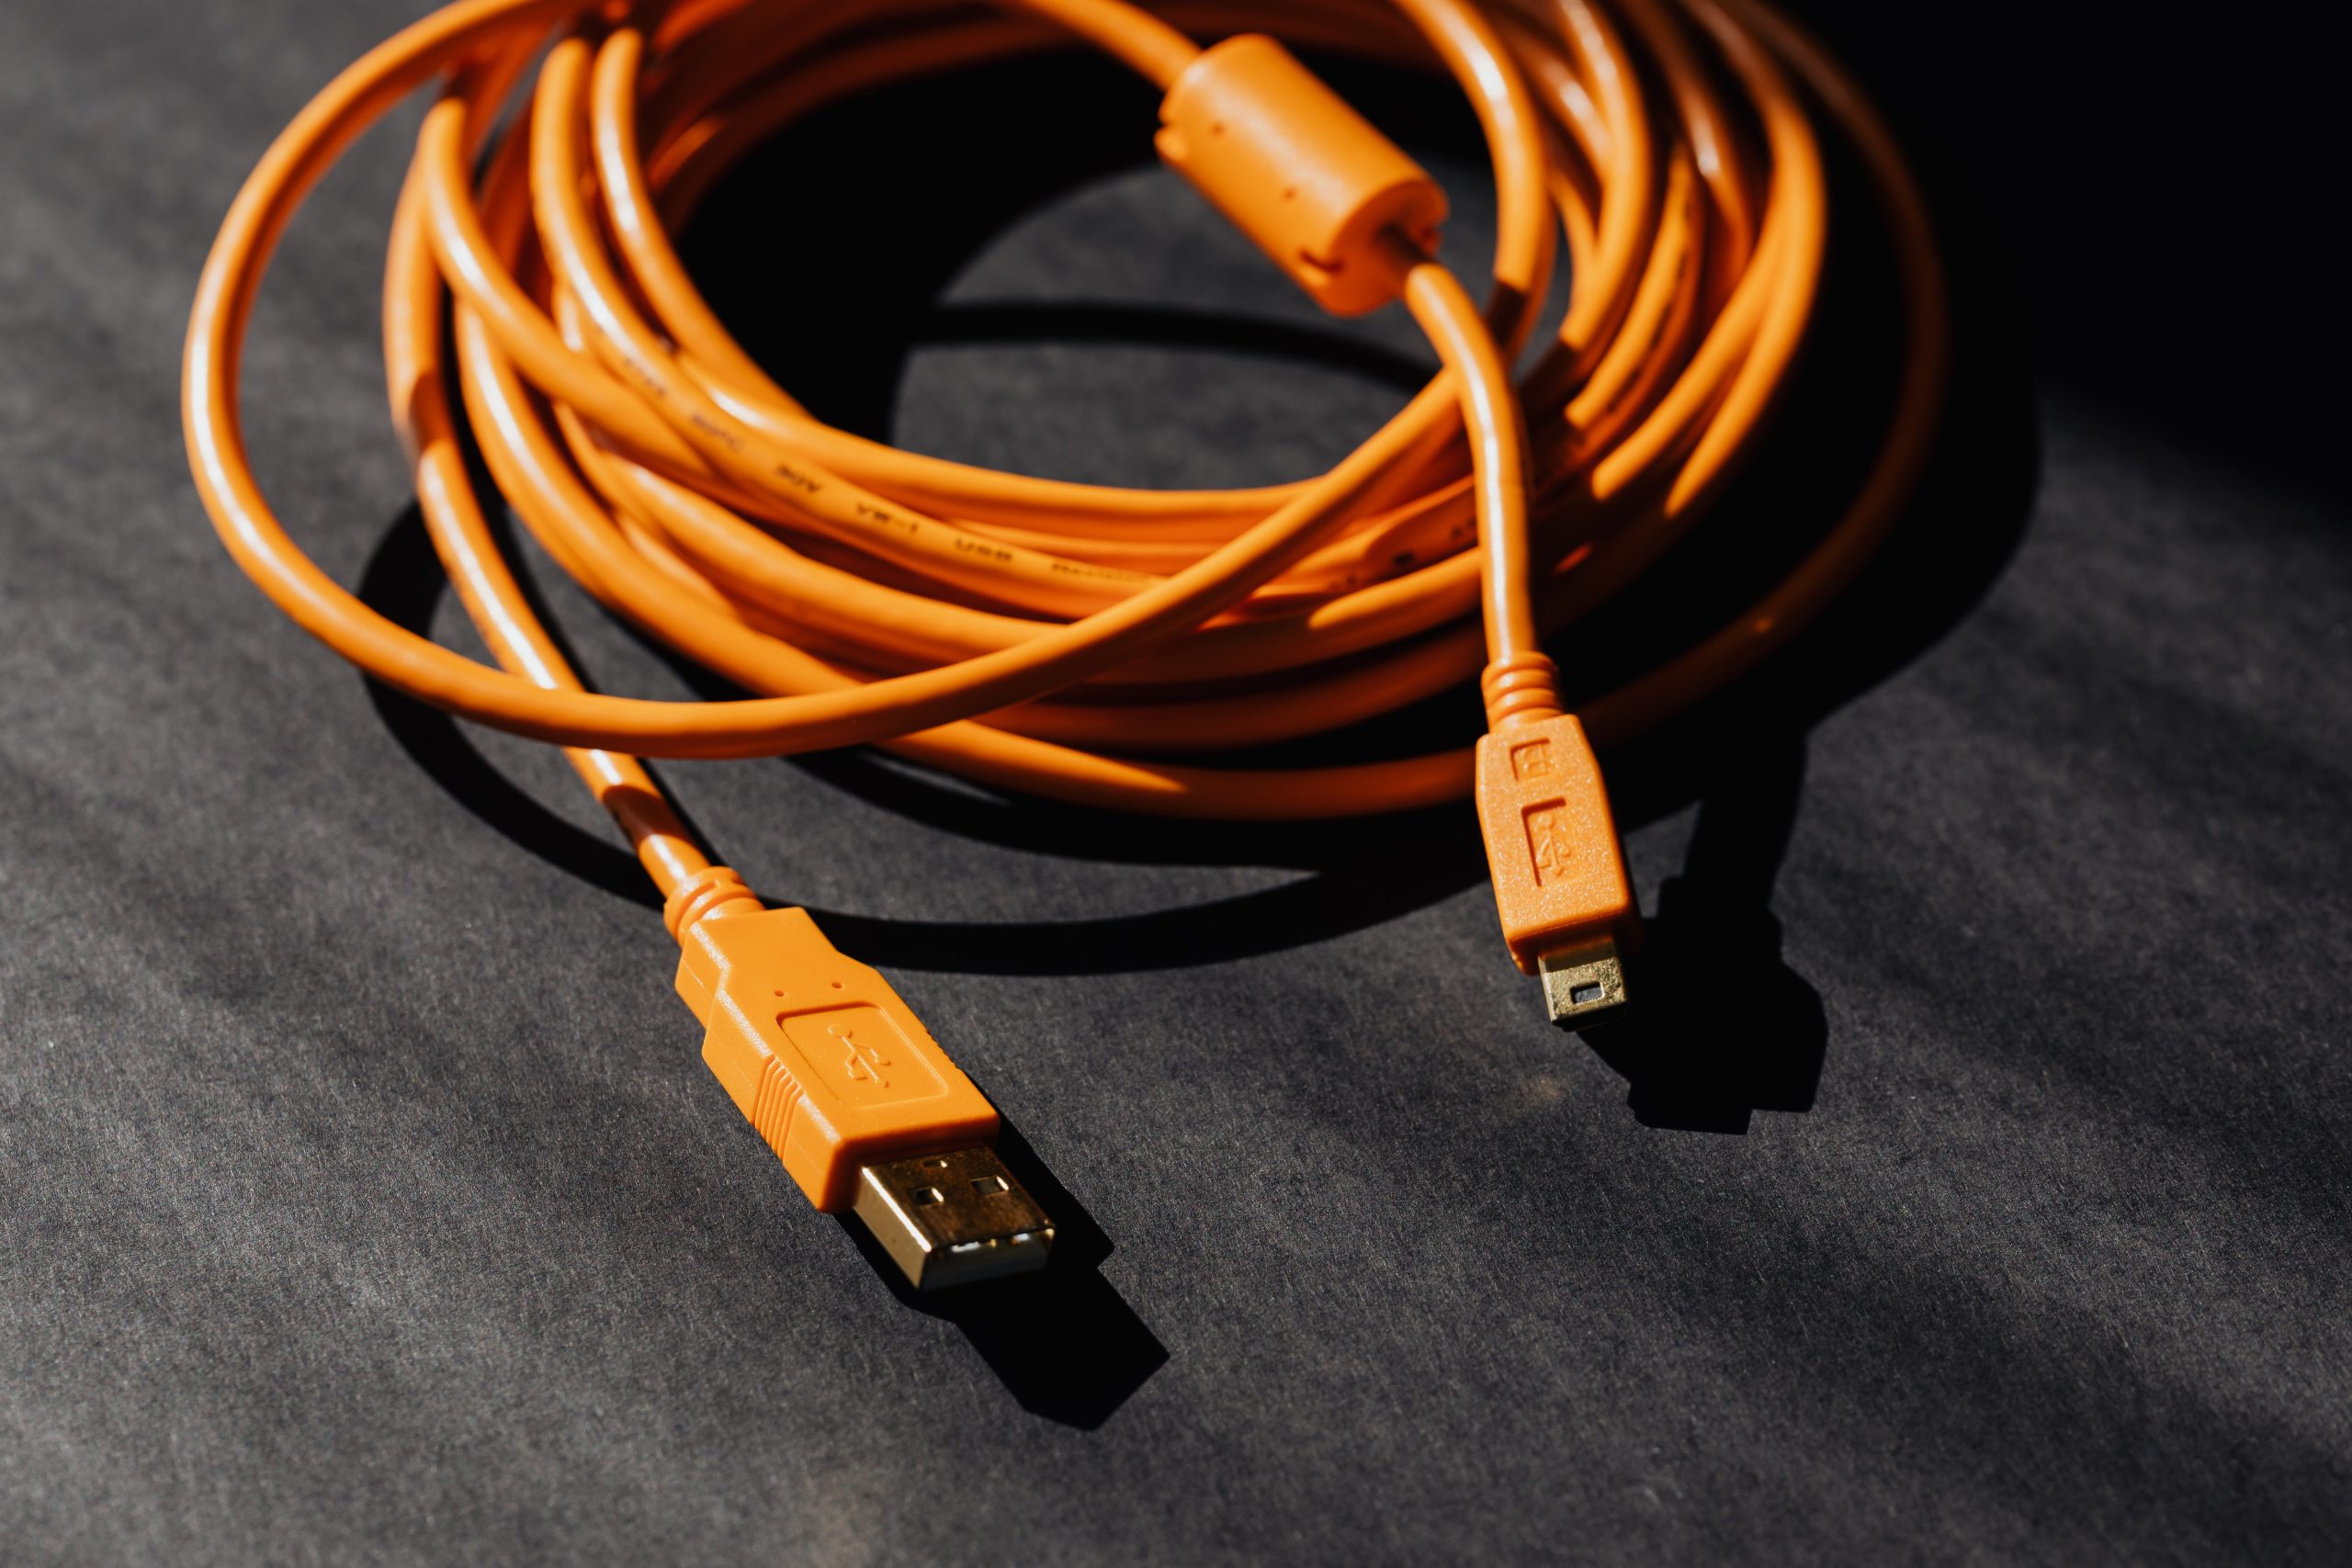 USB Cable: How important is it in a computer?